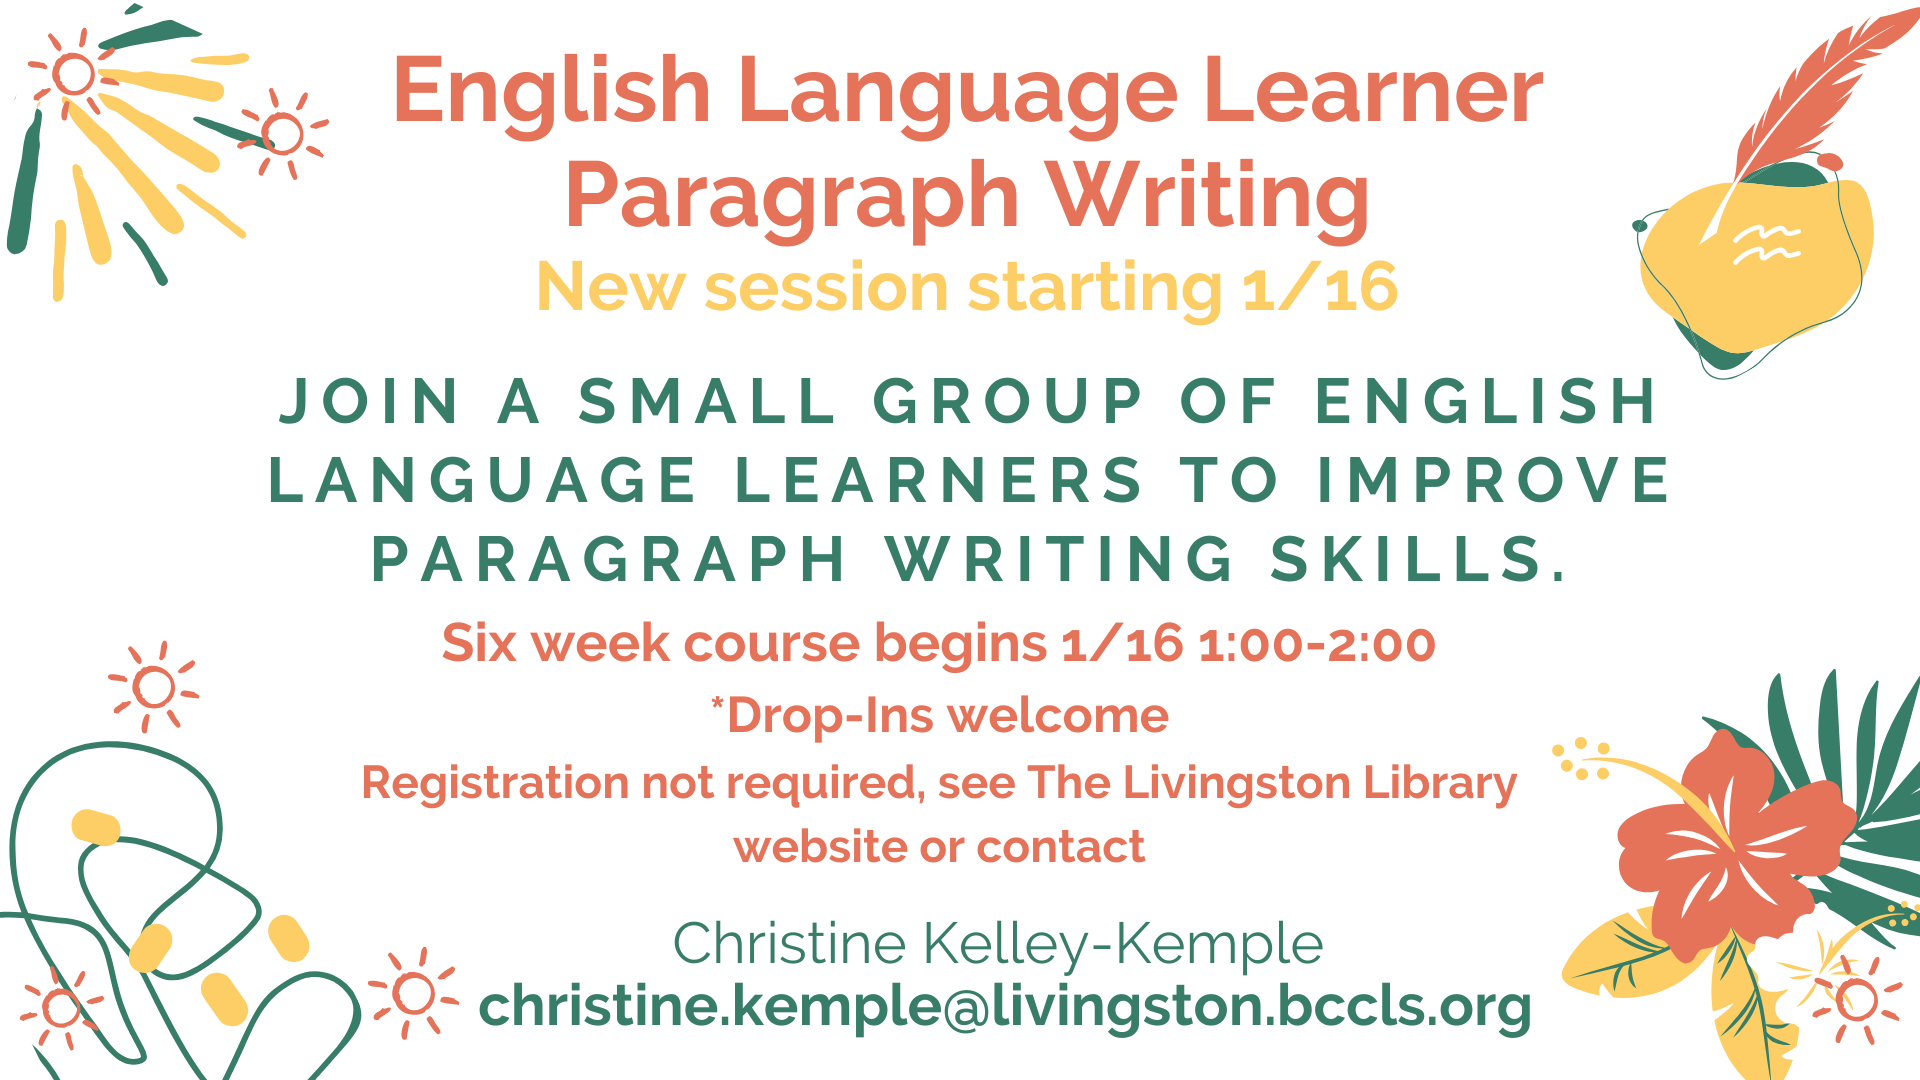 English Language Learner Paragraph Writing Class